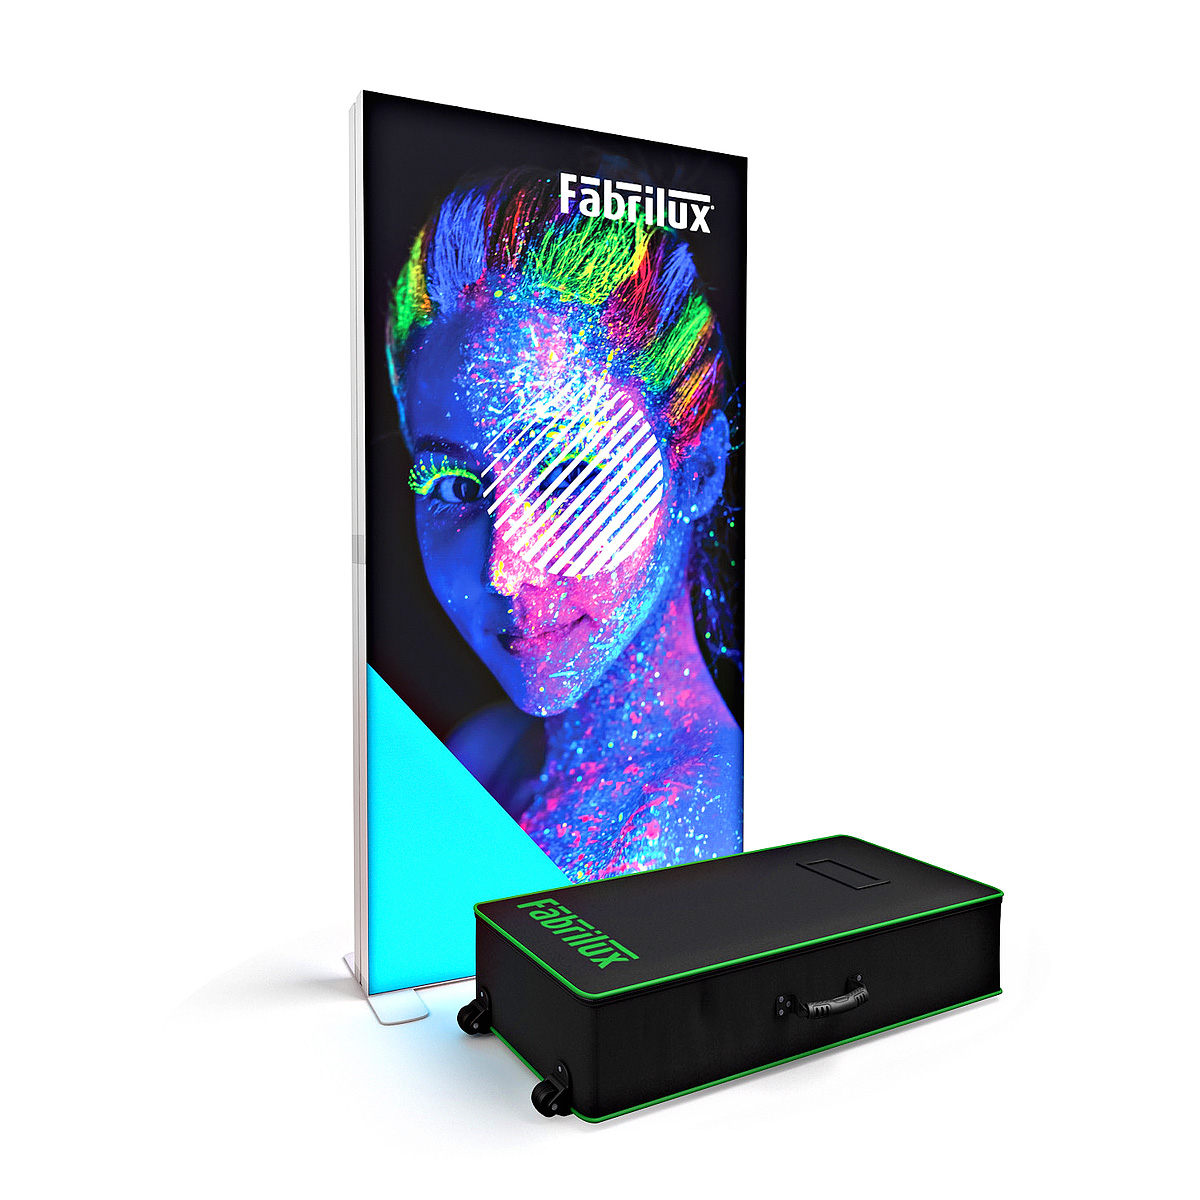 FABRILUX® LED Lightbox Backlit Fabric Exhibition Display 1000 X 2000mm